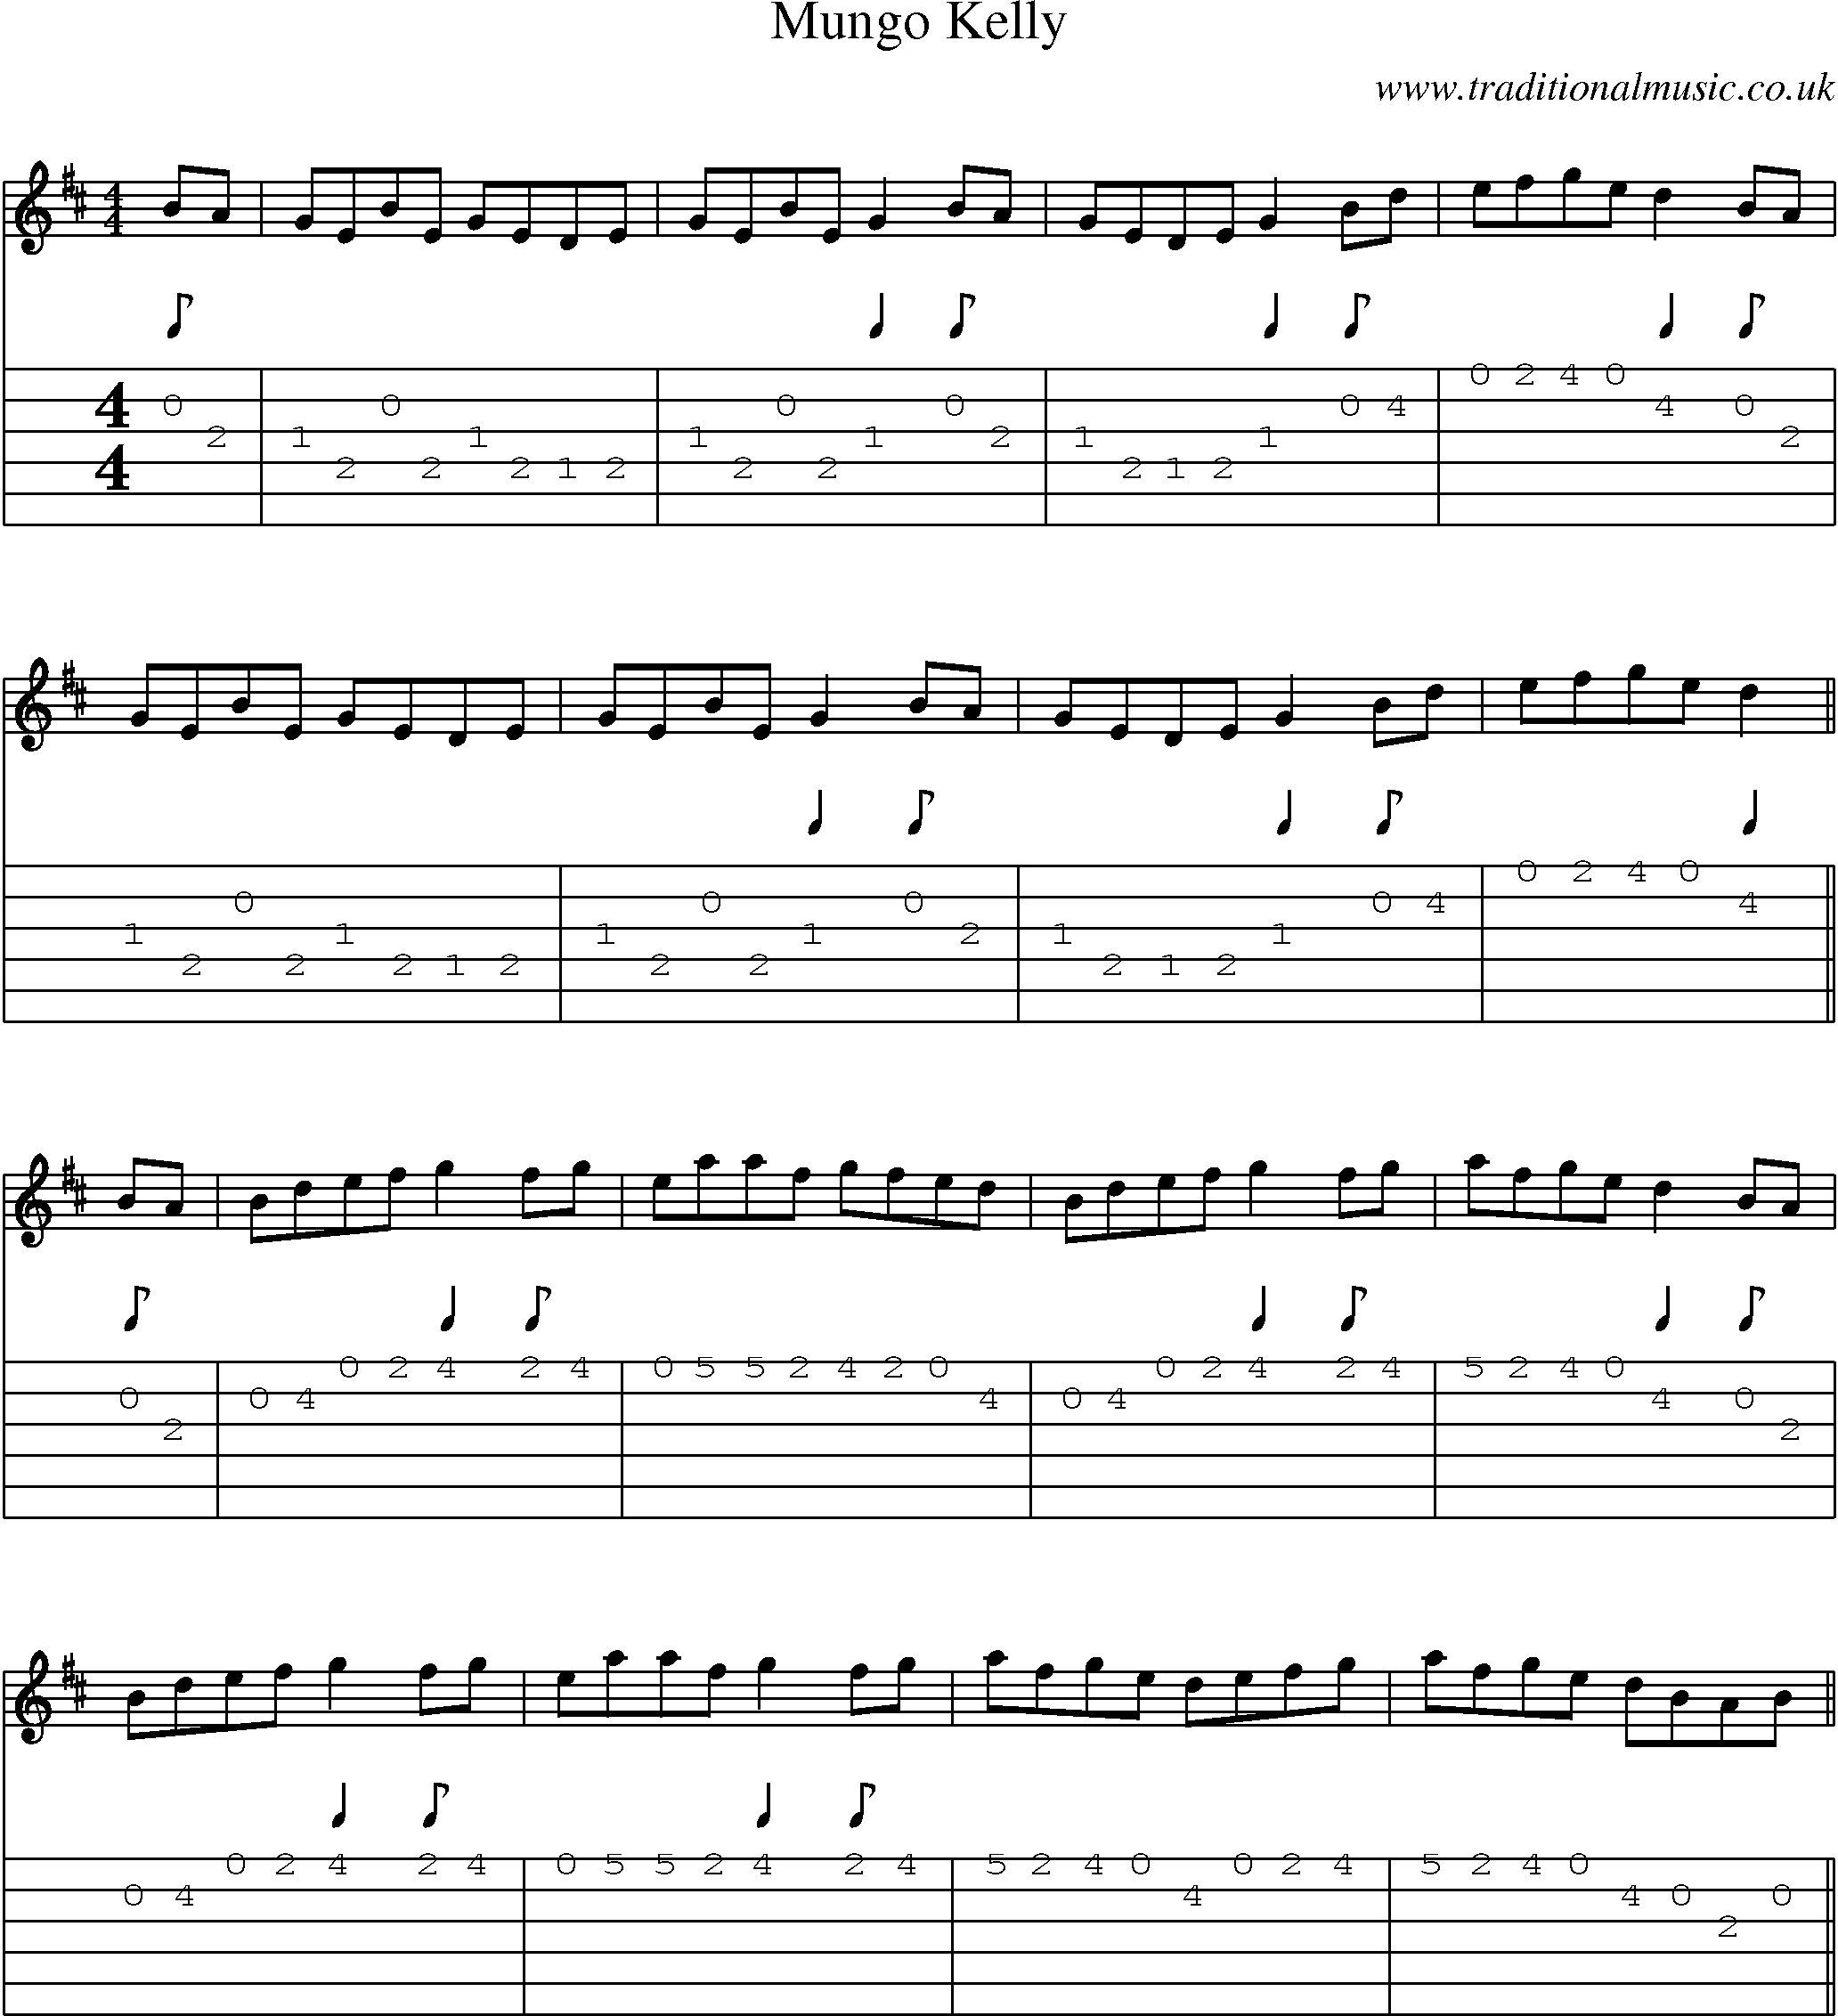 Music Score and Guitar Tabs for Mungo Kelly